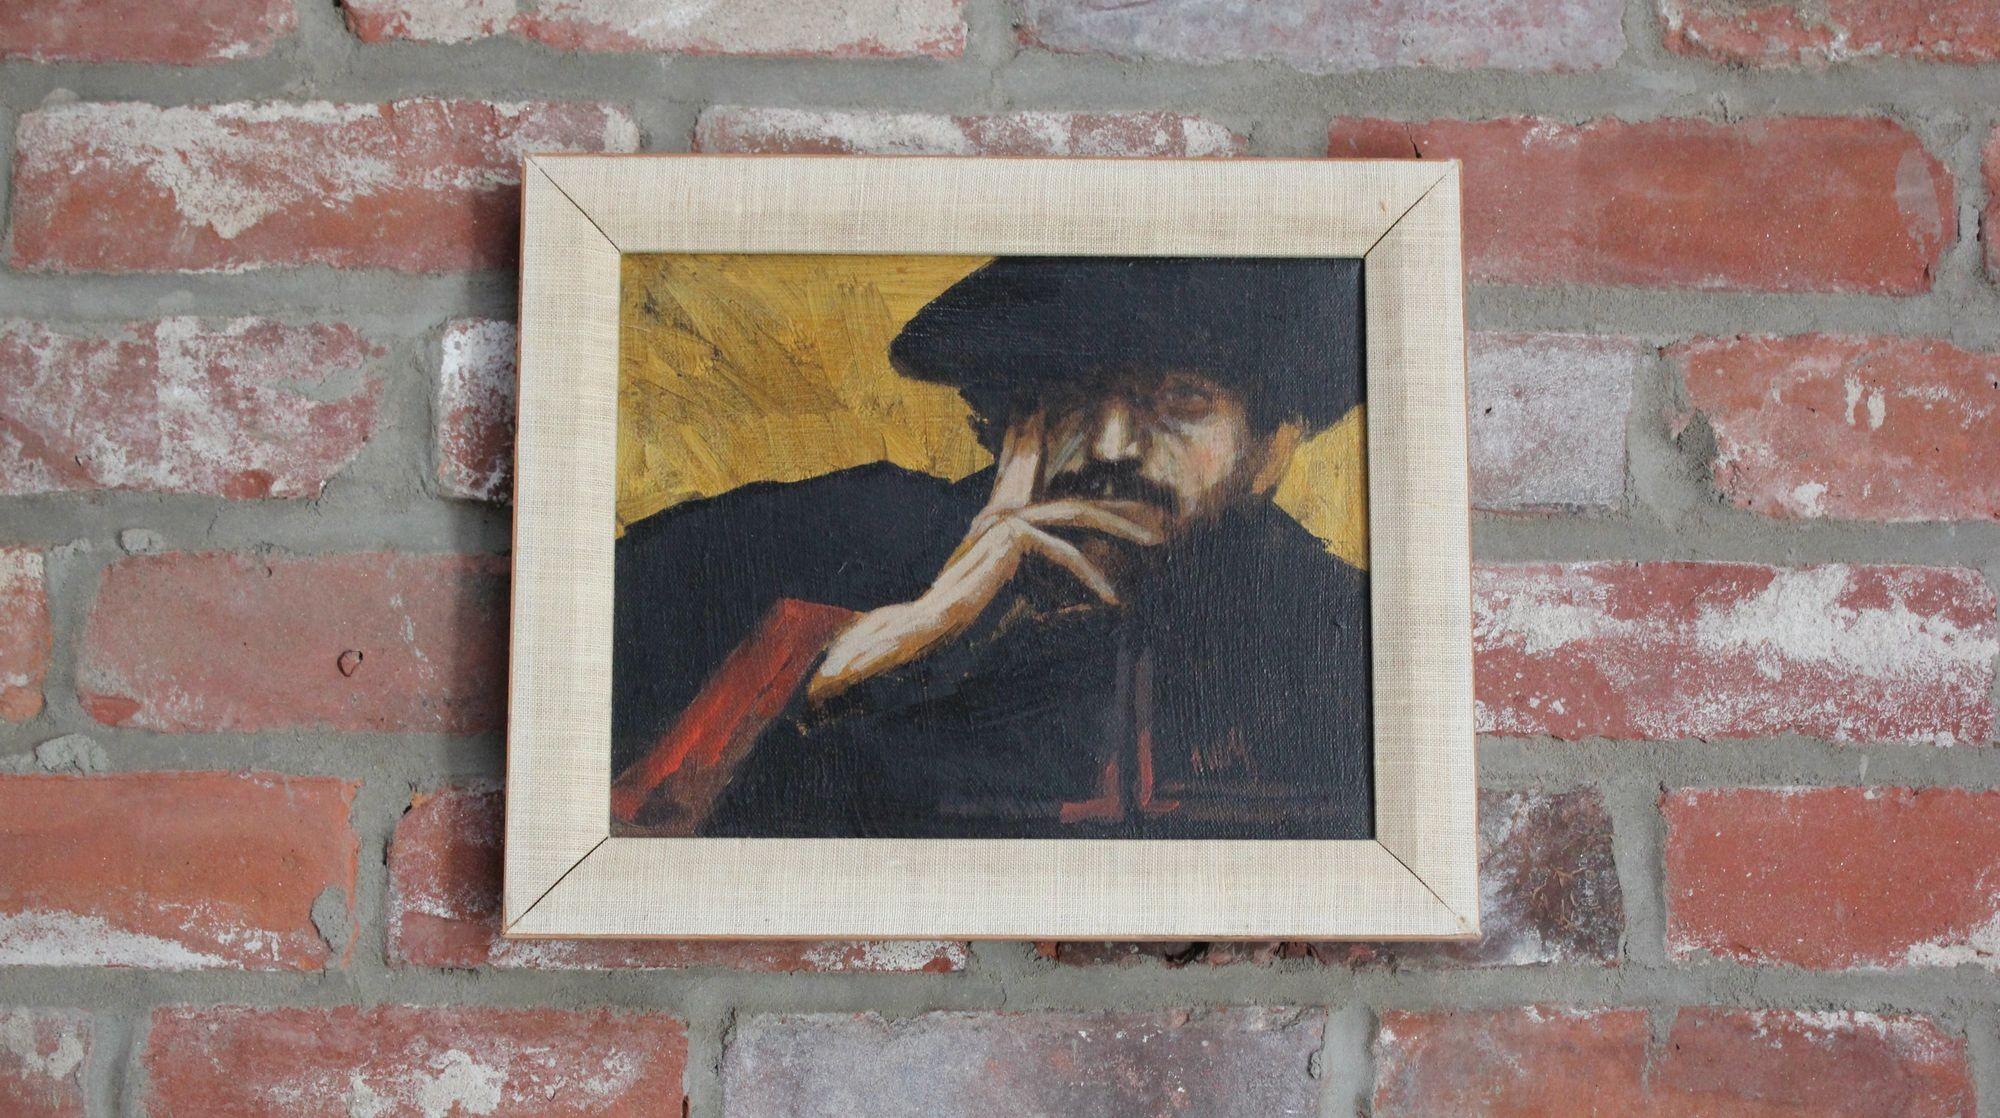 Oil painting believed to depict a Musketeer with hat and cloak with his hand on his face (ca. 20th Century).
Signed 